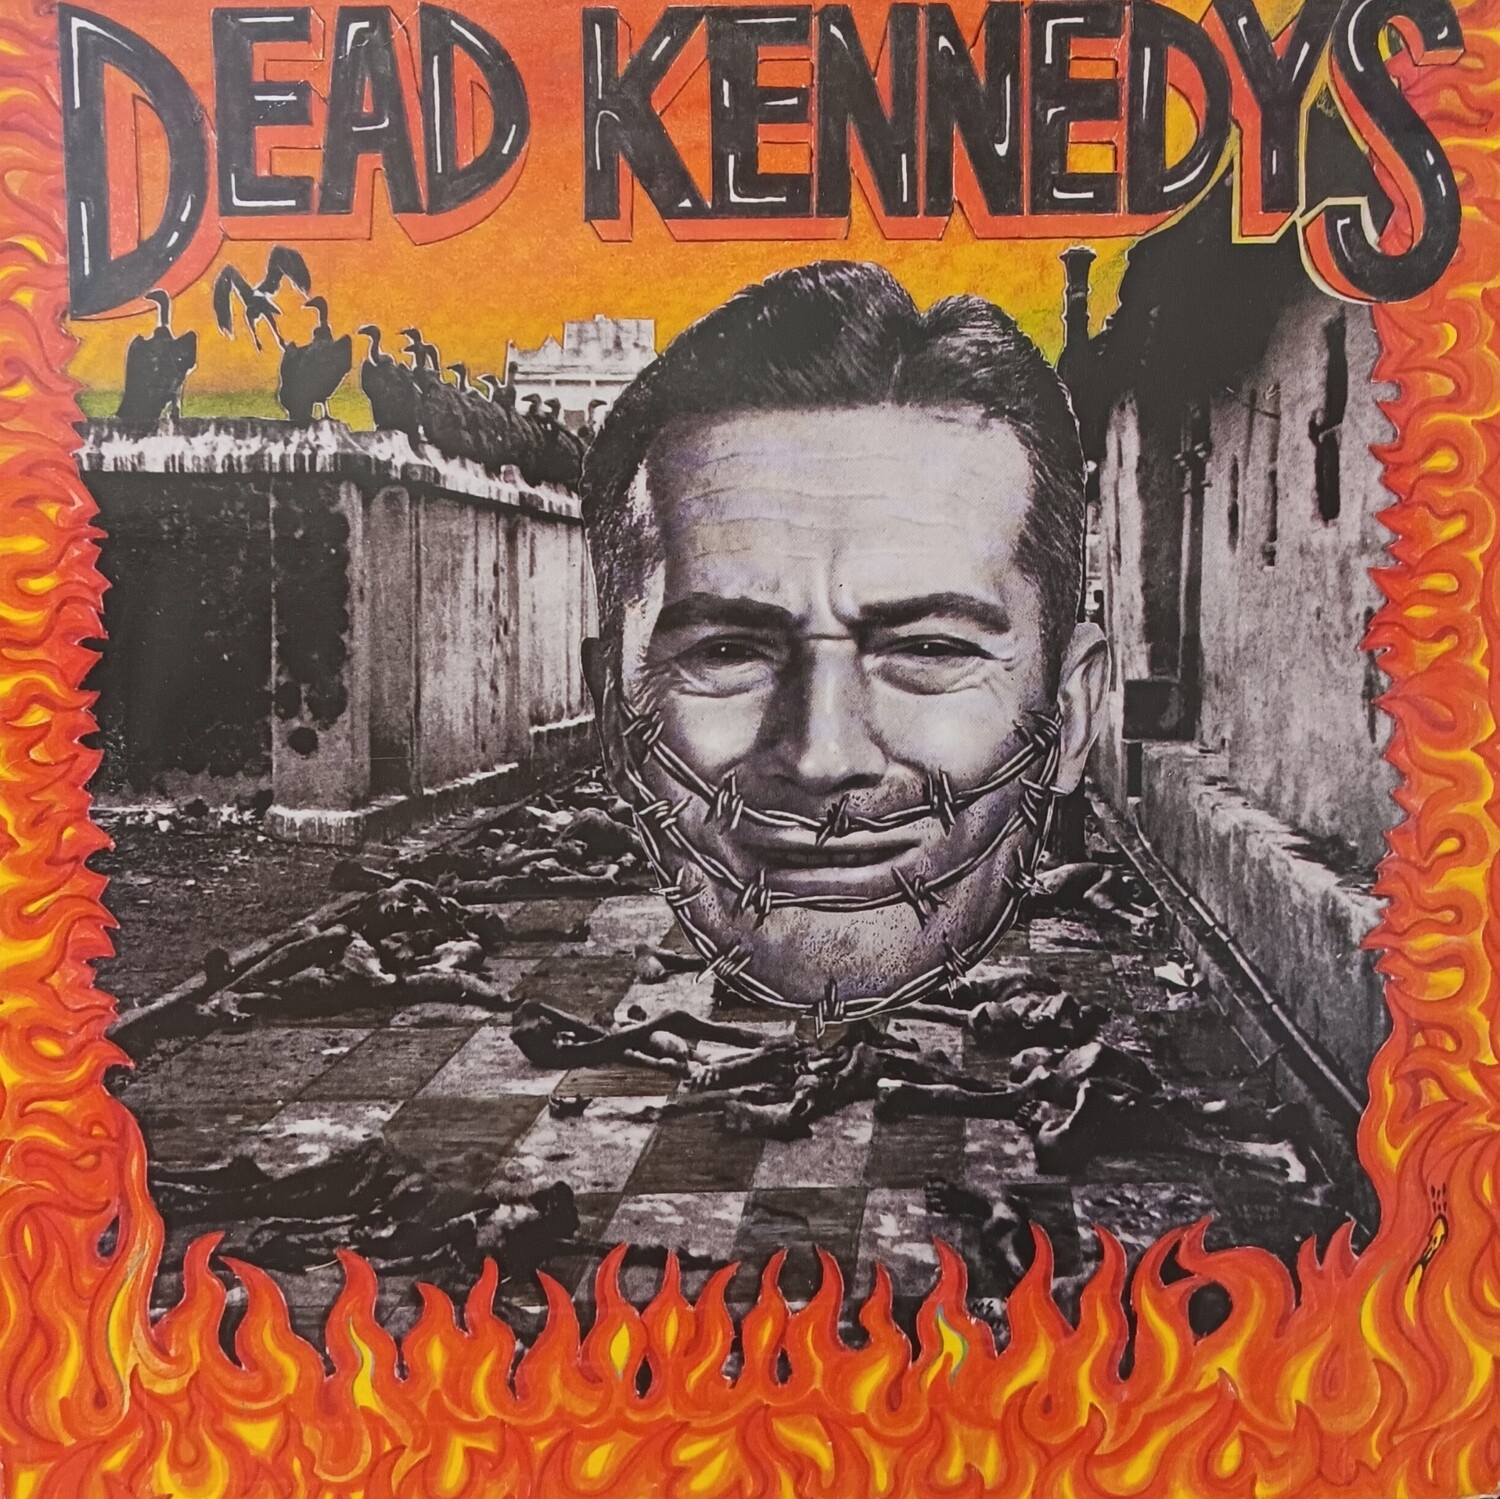 DEAD KENNEDYS - Give me convenience or give me death